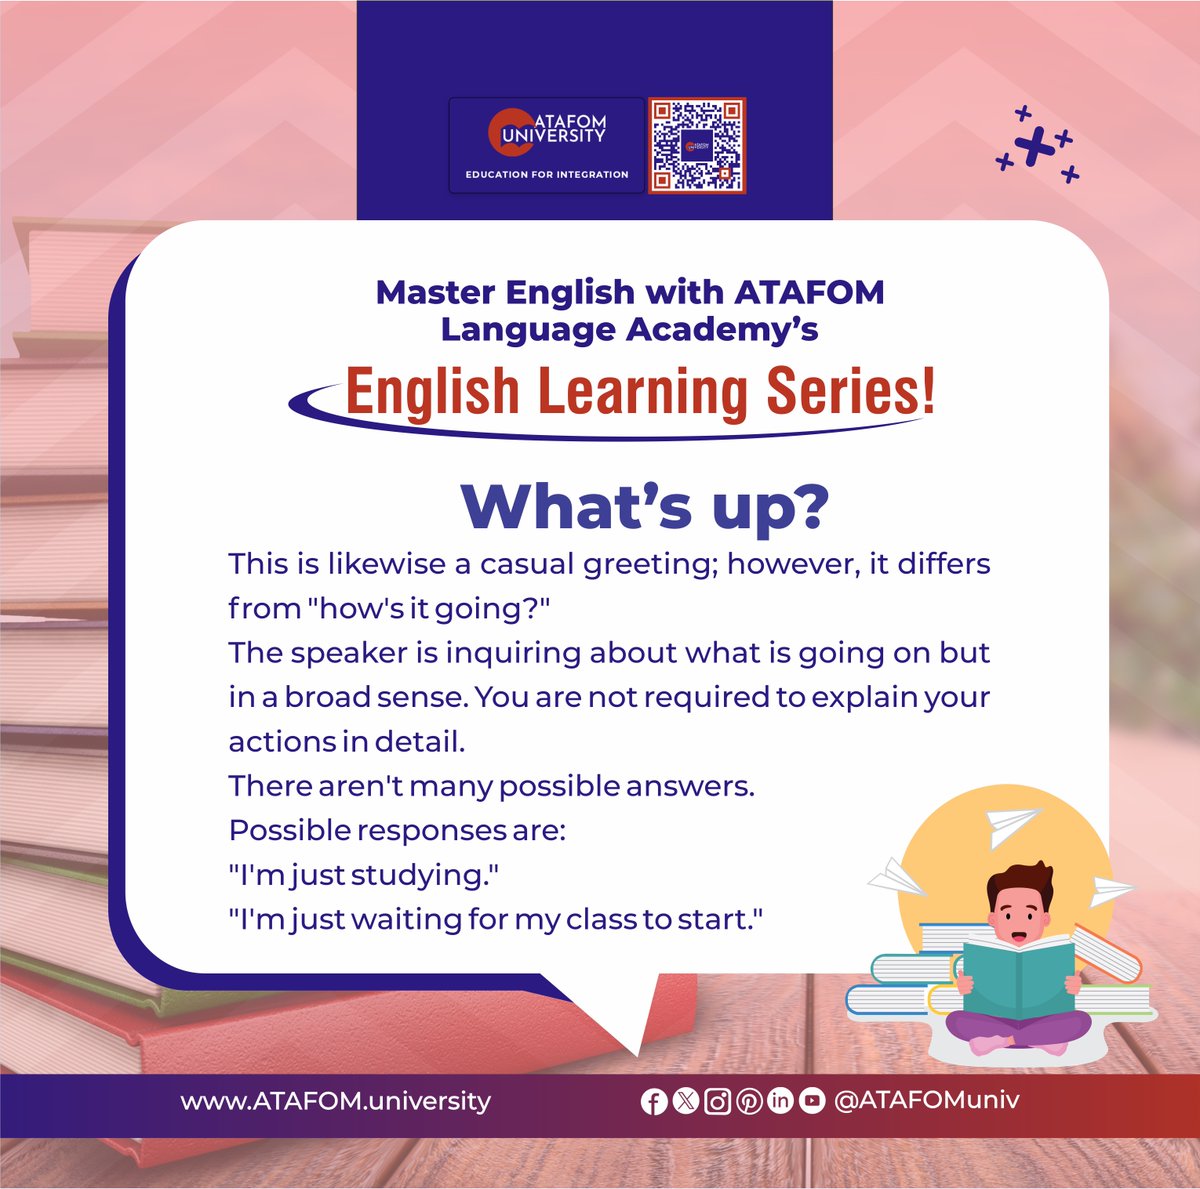 Master English with ATAFOM University's immersive series!

Elevate your language skills and unlock new opportunities. Enroll today!

#ATAFOMUniversity #LanguageMastery #EnglishLanguage #EducationForAll #LearnEnglish #LanguageLearning #HigherEducation #ATAFOM…